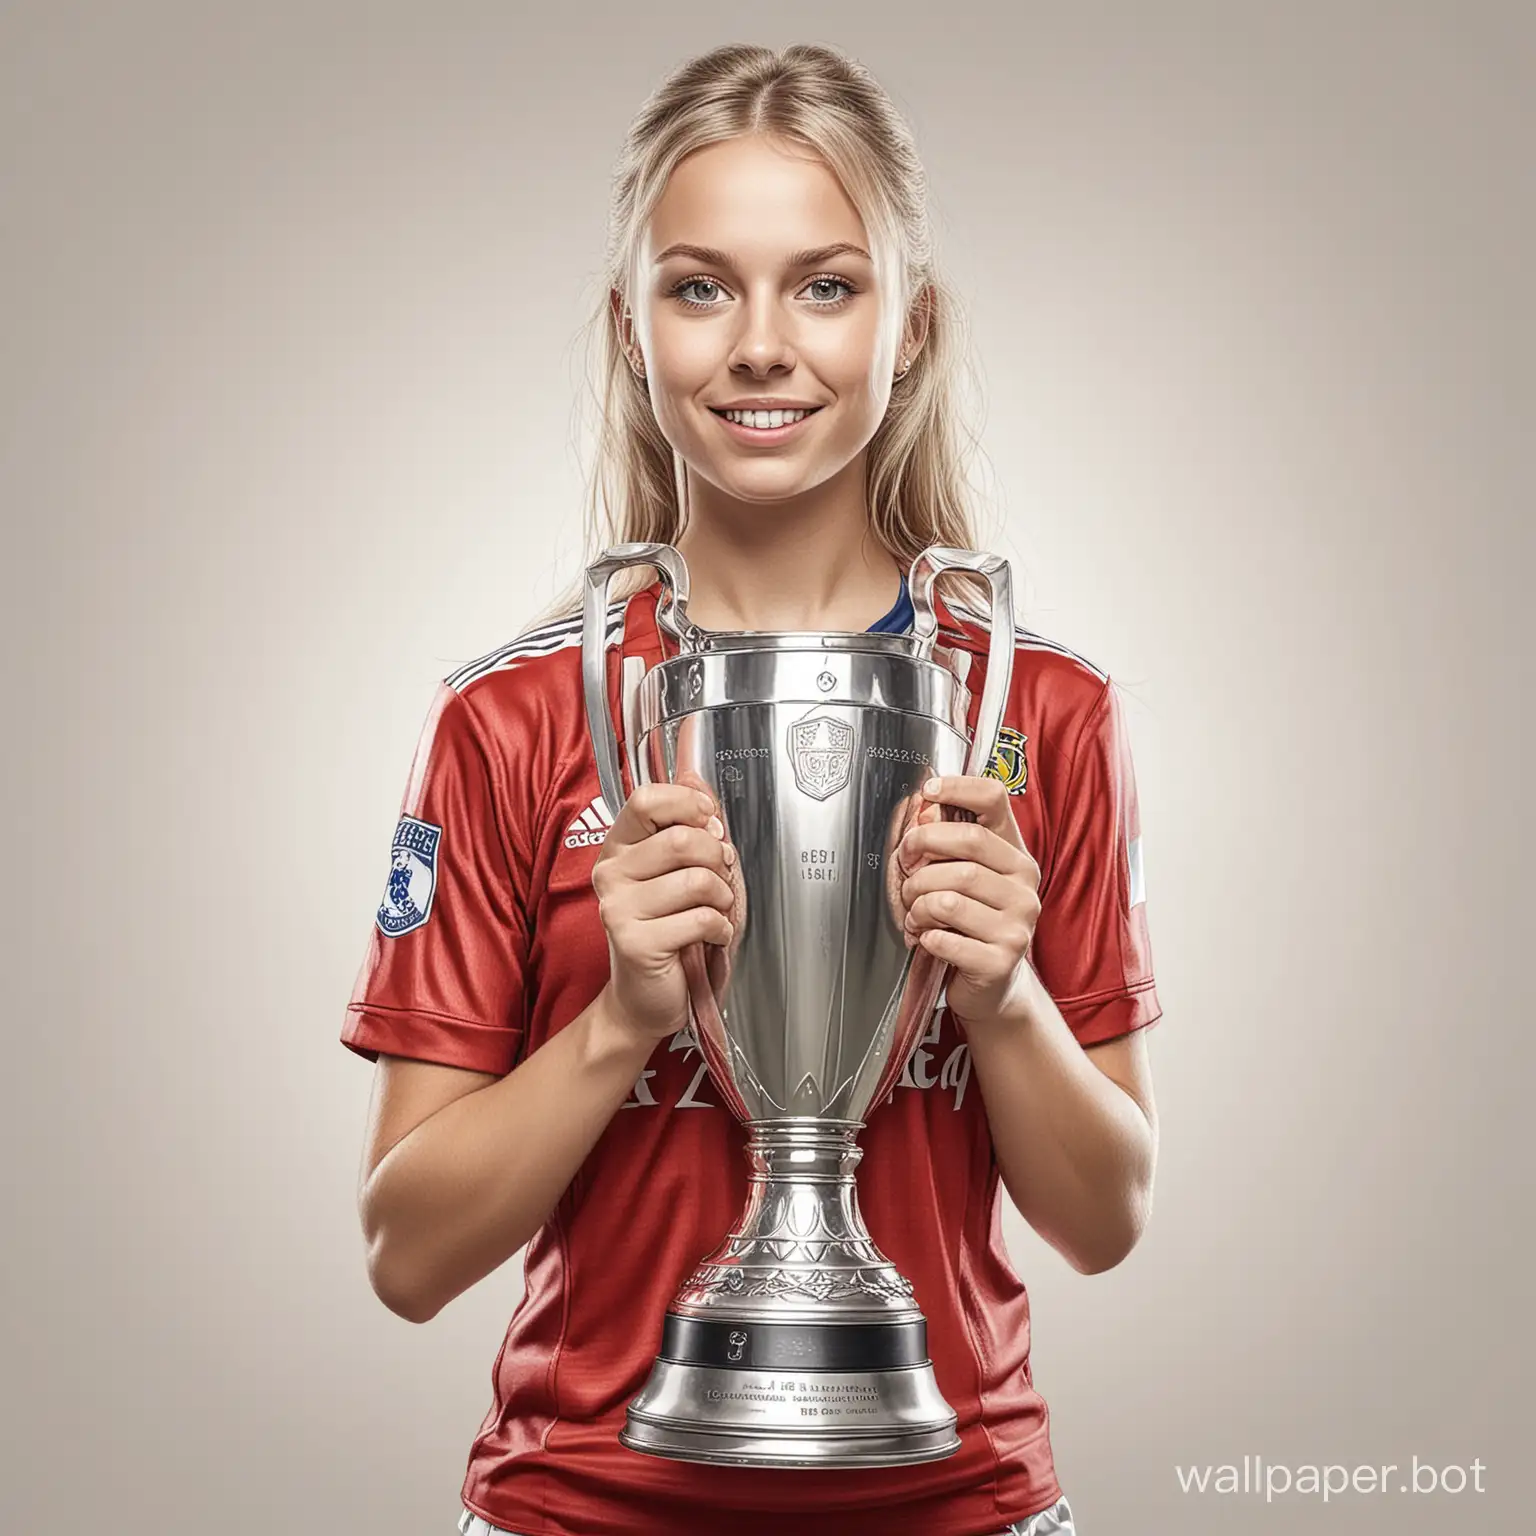 sketch young Swede 6th breast size narrow waist in red and white soccer uniform holding a big Champions League cup on a white background highly realistic drawing with colored liner